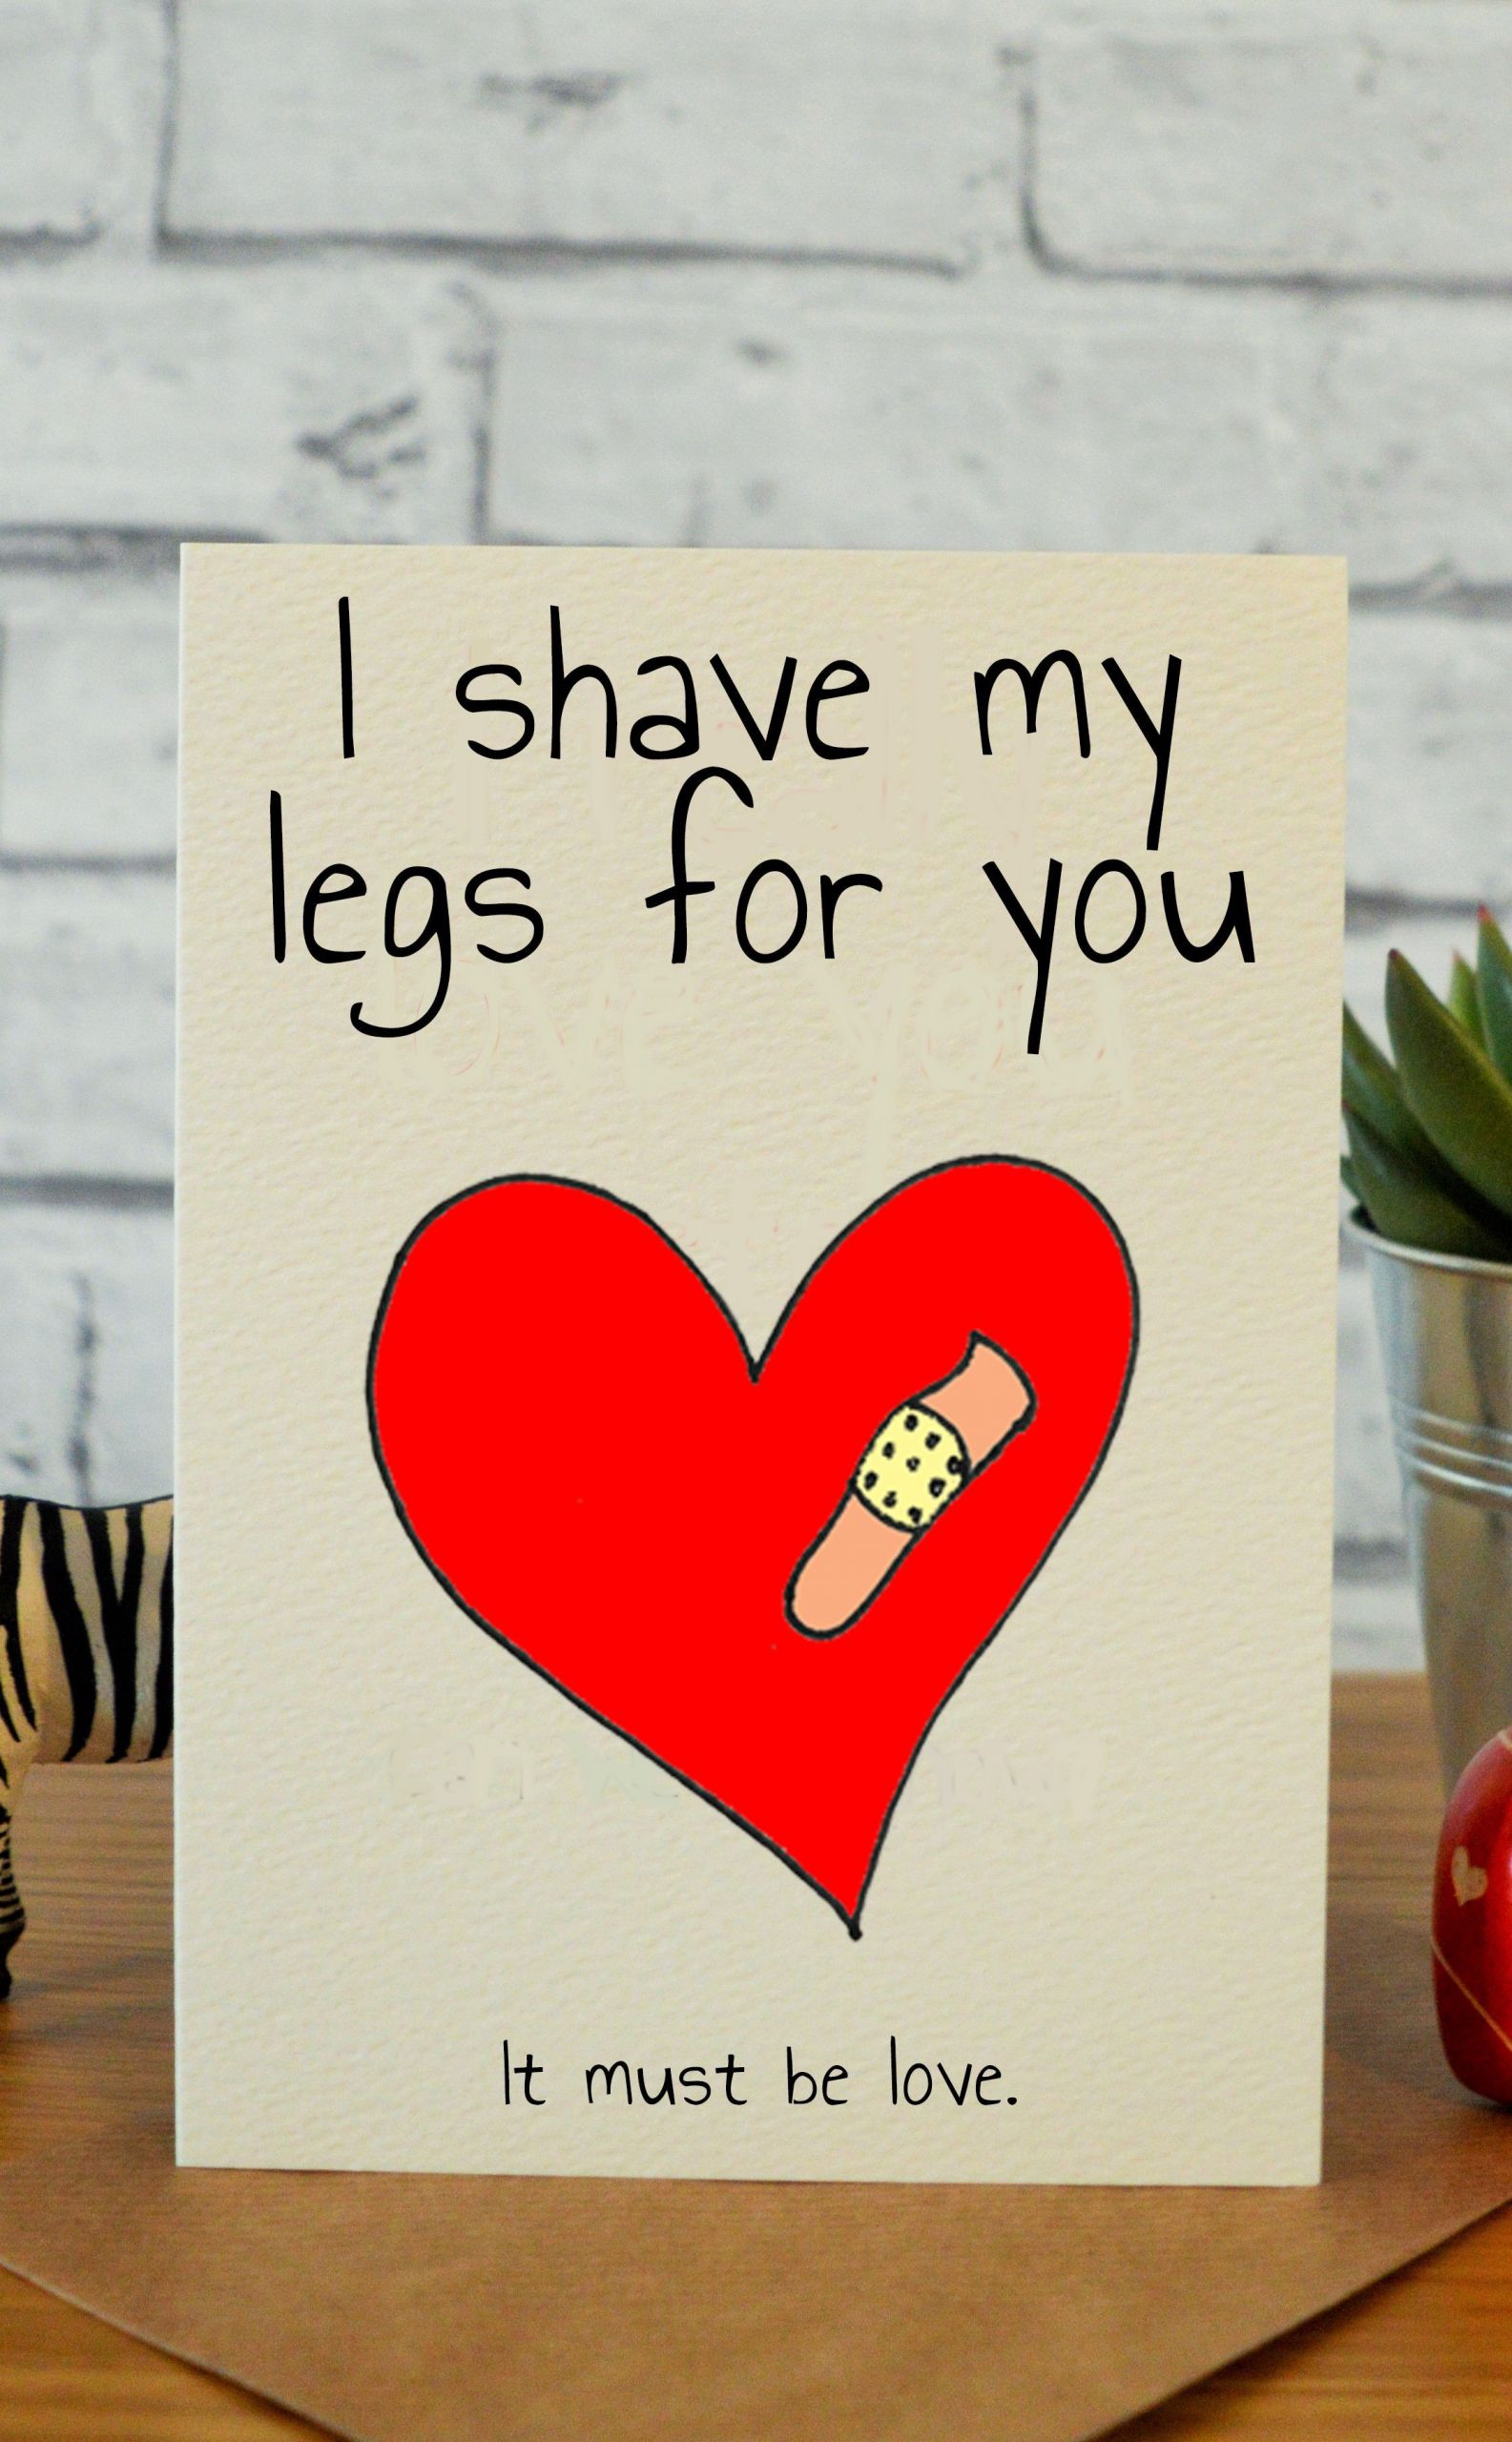 Funny Valentines Day Gifts For Boyfriend
 Funny anniversary cards funny valentines day cards